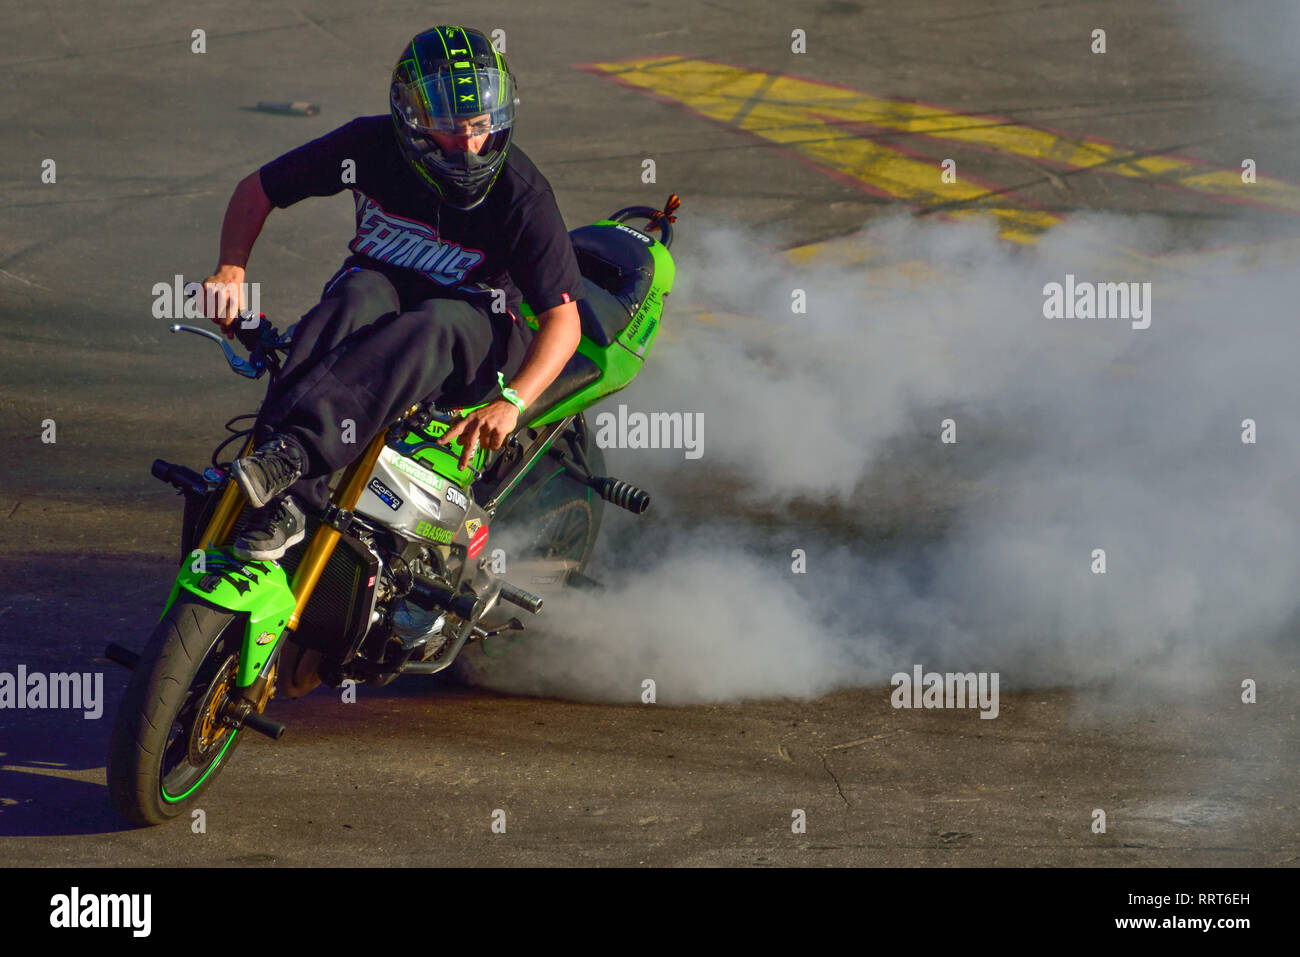 Moscow, Russia - June 7, 2015: Stunt motorcycle rider performing at a local spot. Stock Photo